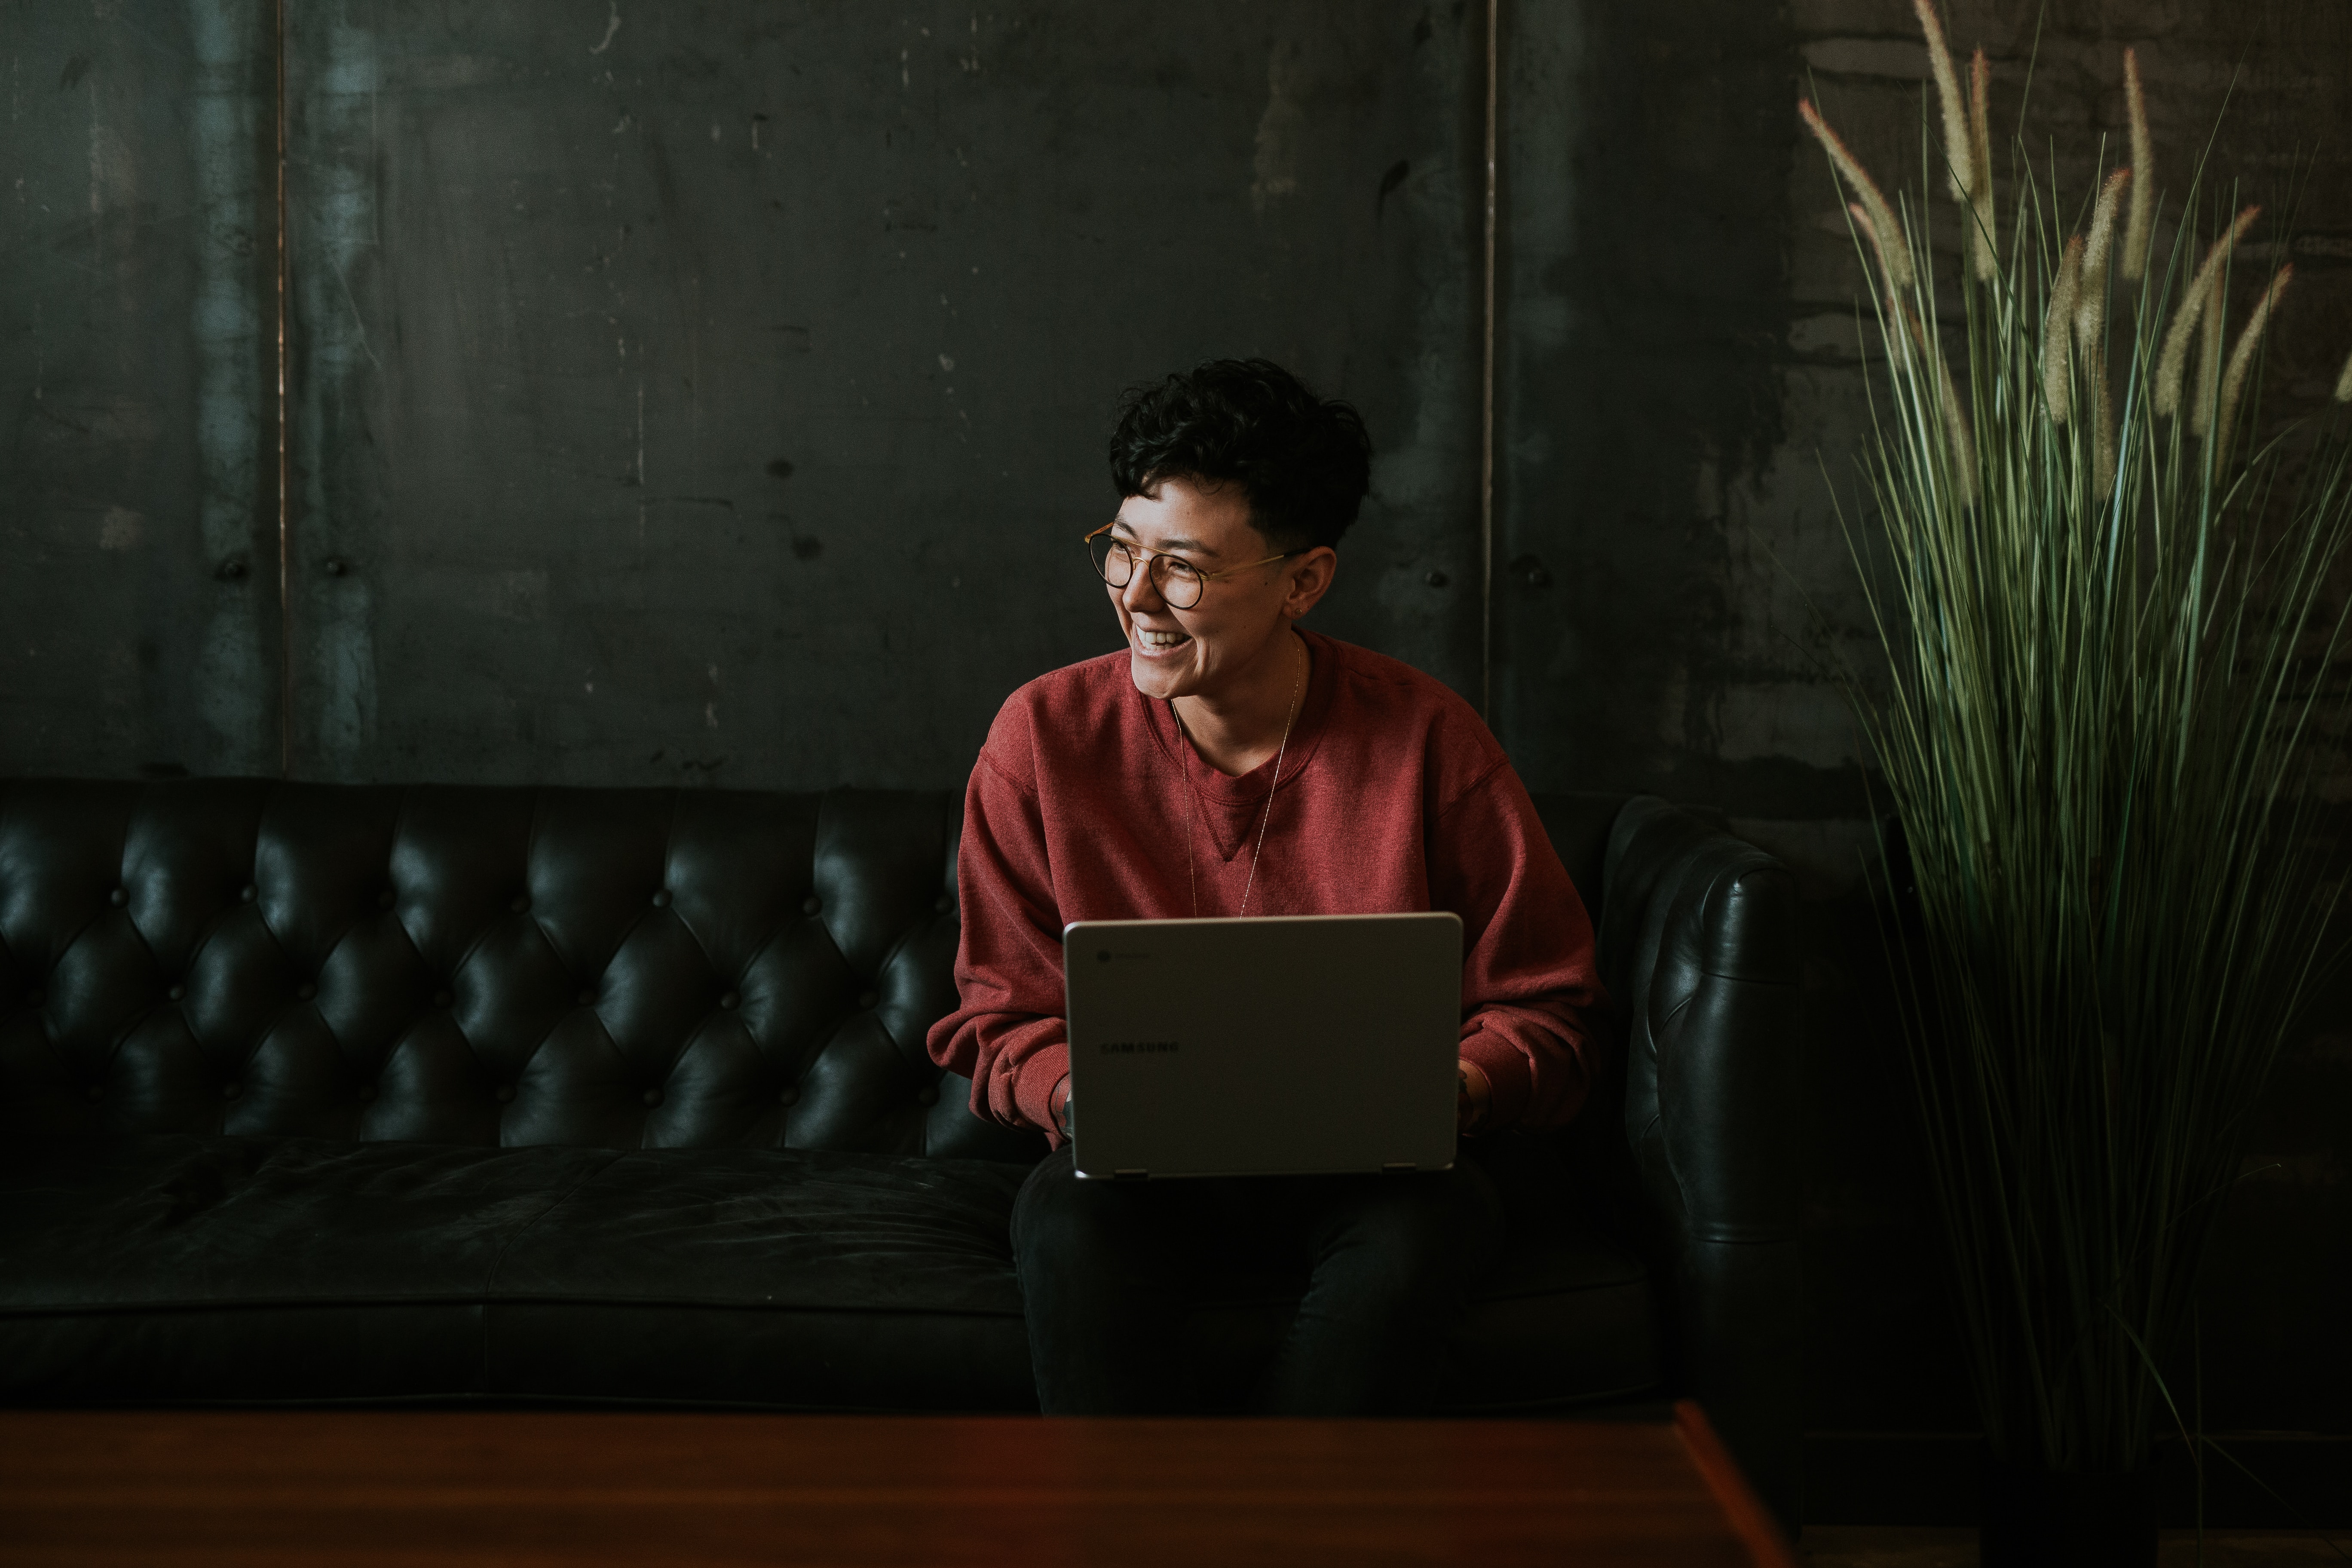 Unsplash photo: Dark room with woman on leather couch next to a tall plant, laptop on lap, laughing